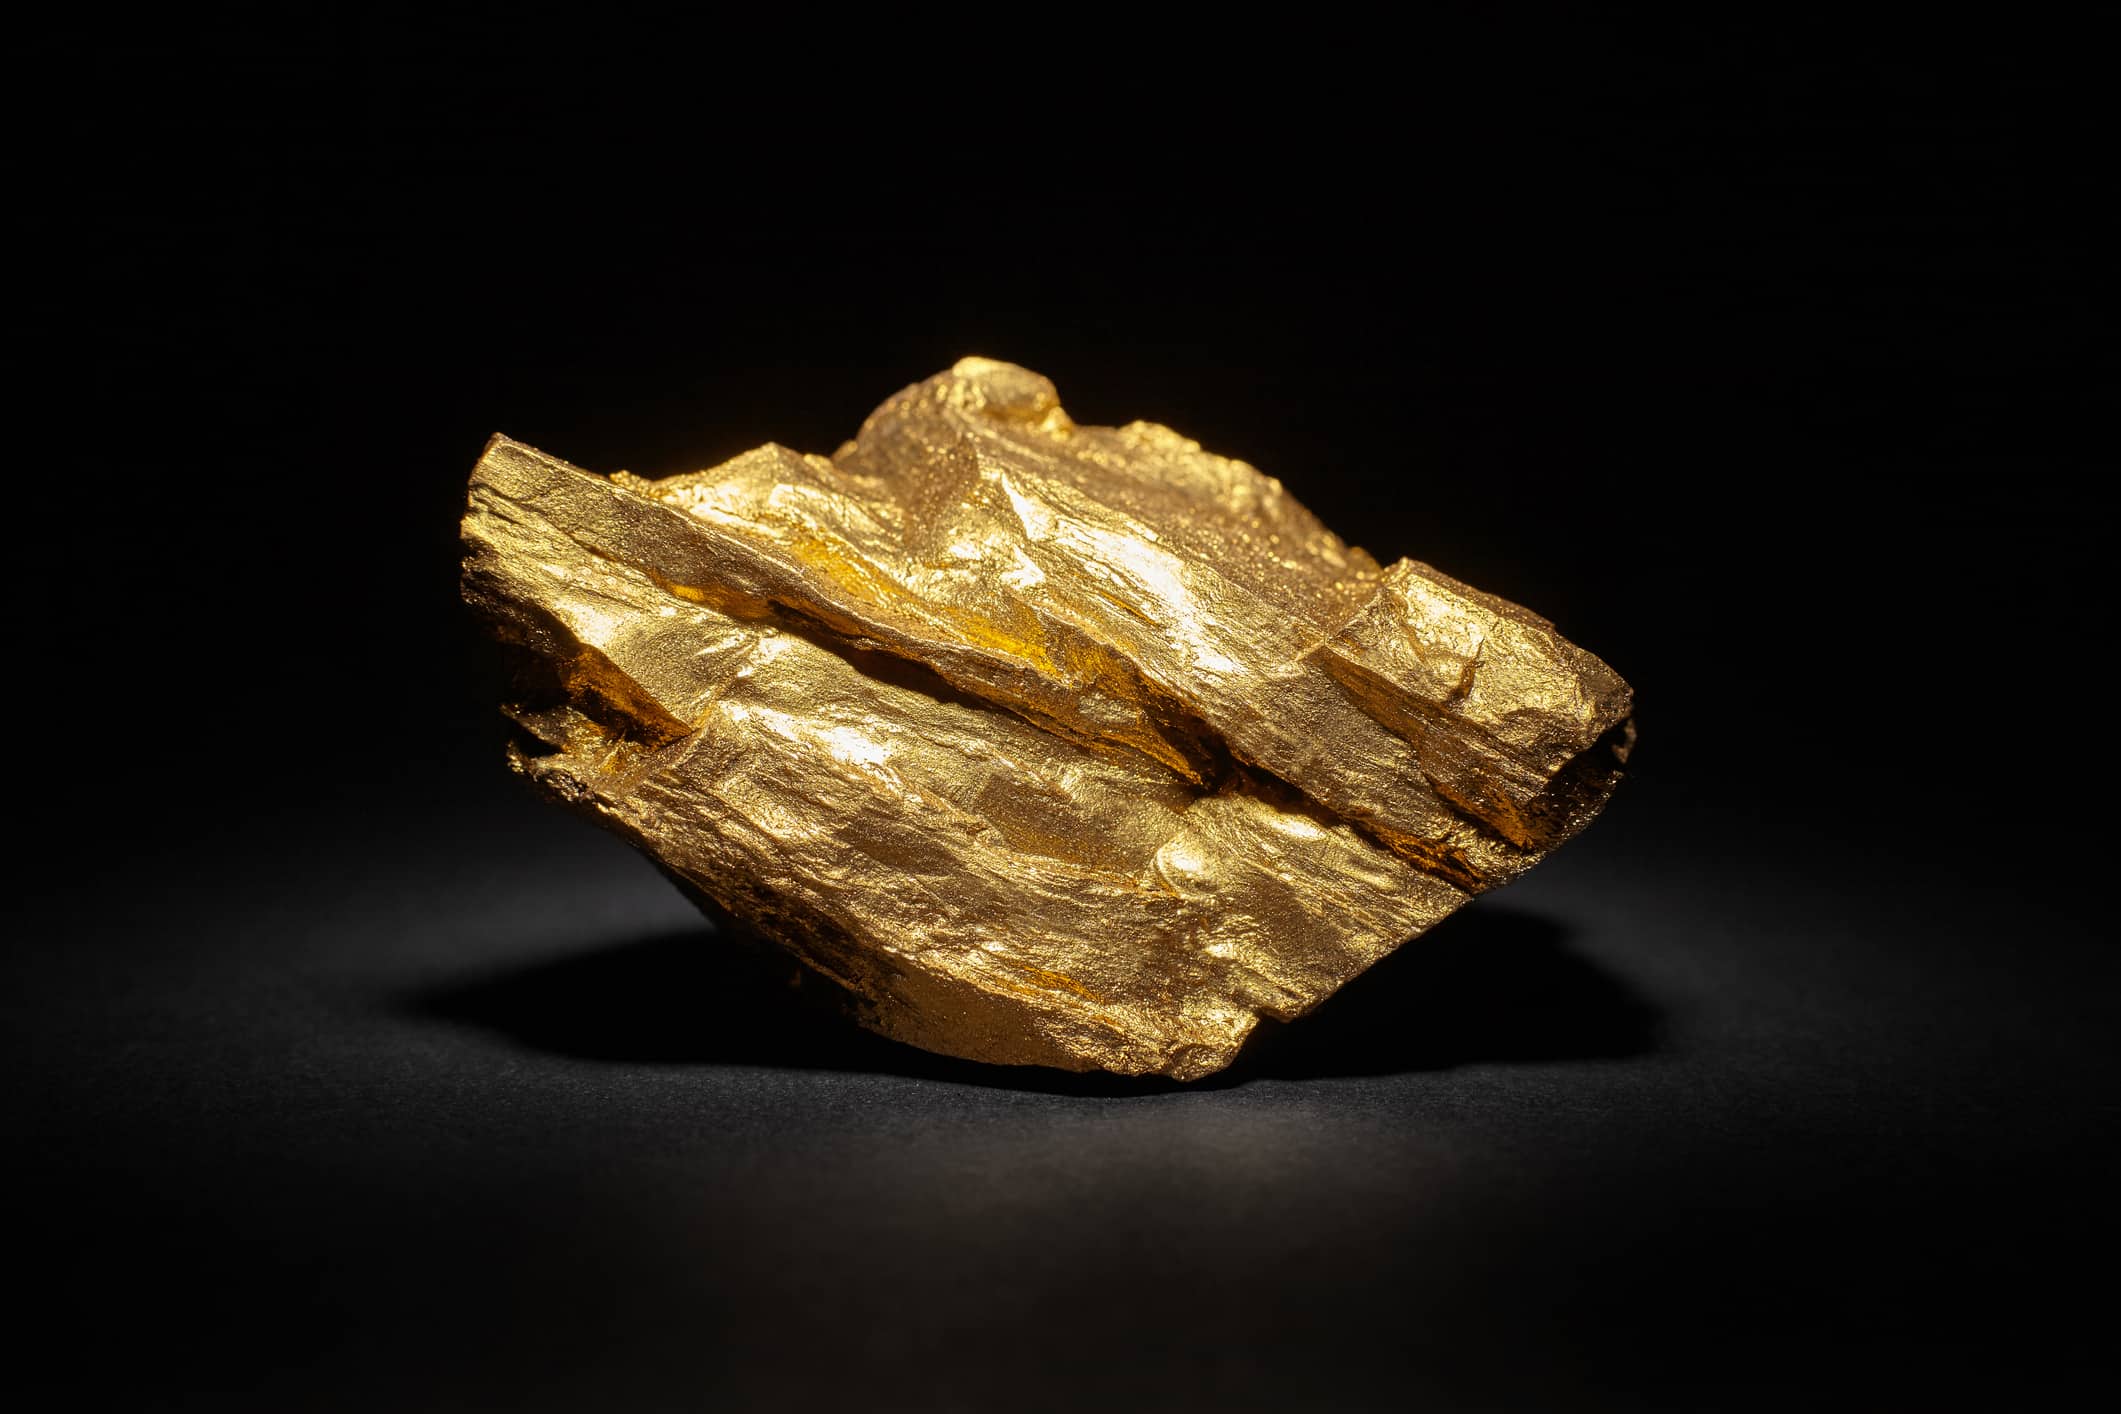 One of Colorado's biggest gold nuggets on display in Colorado